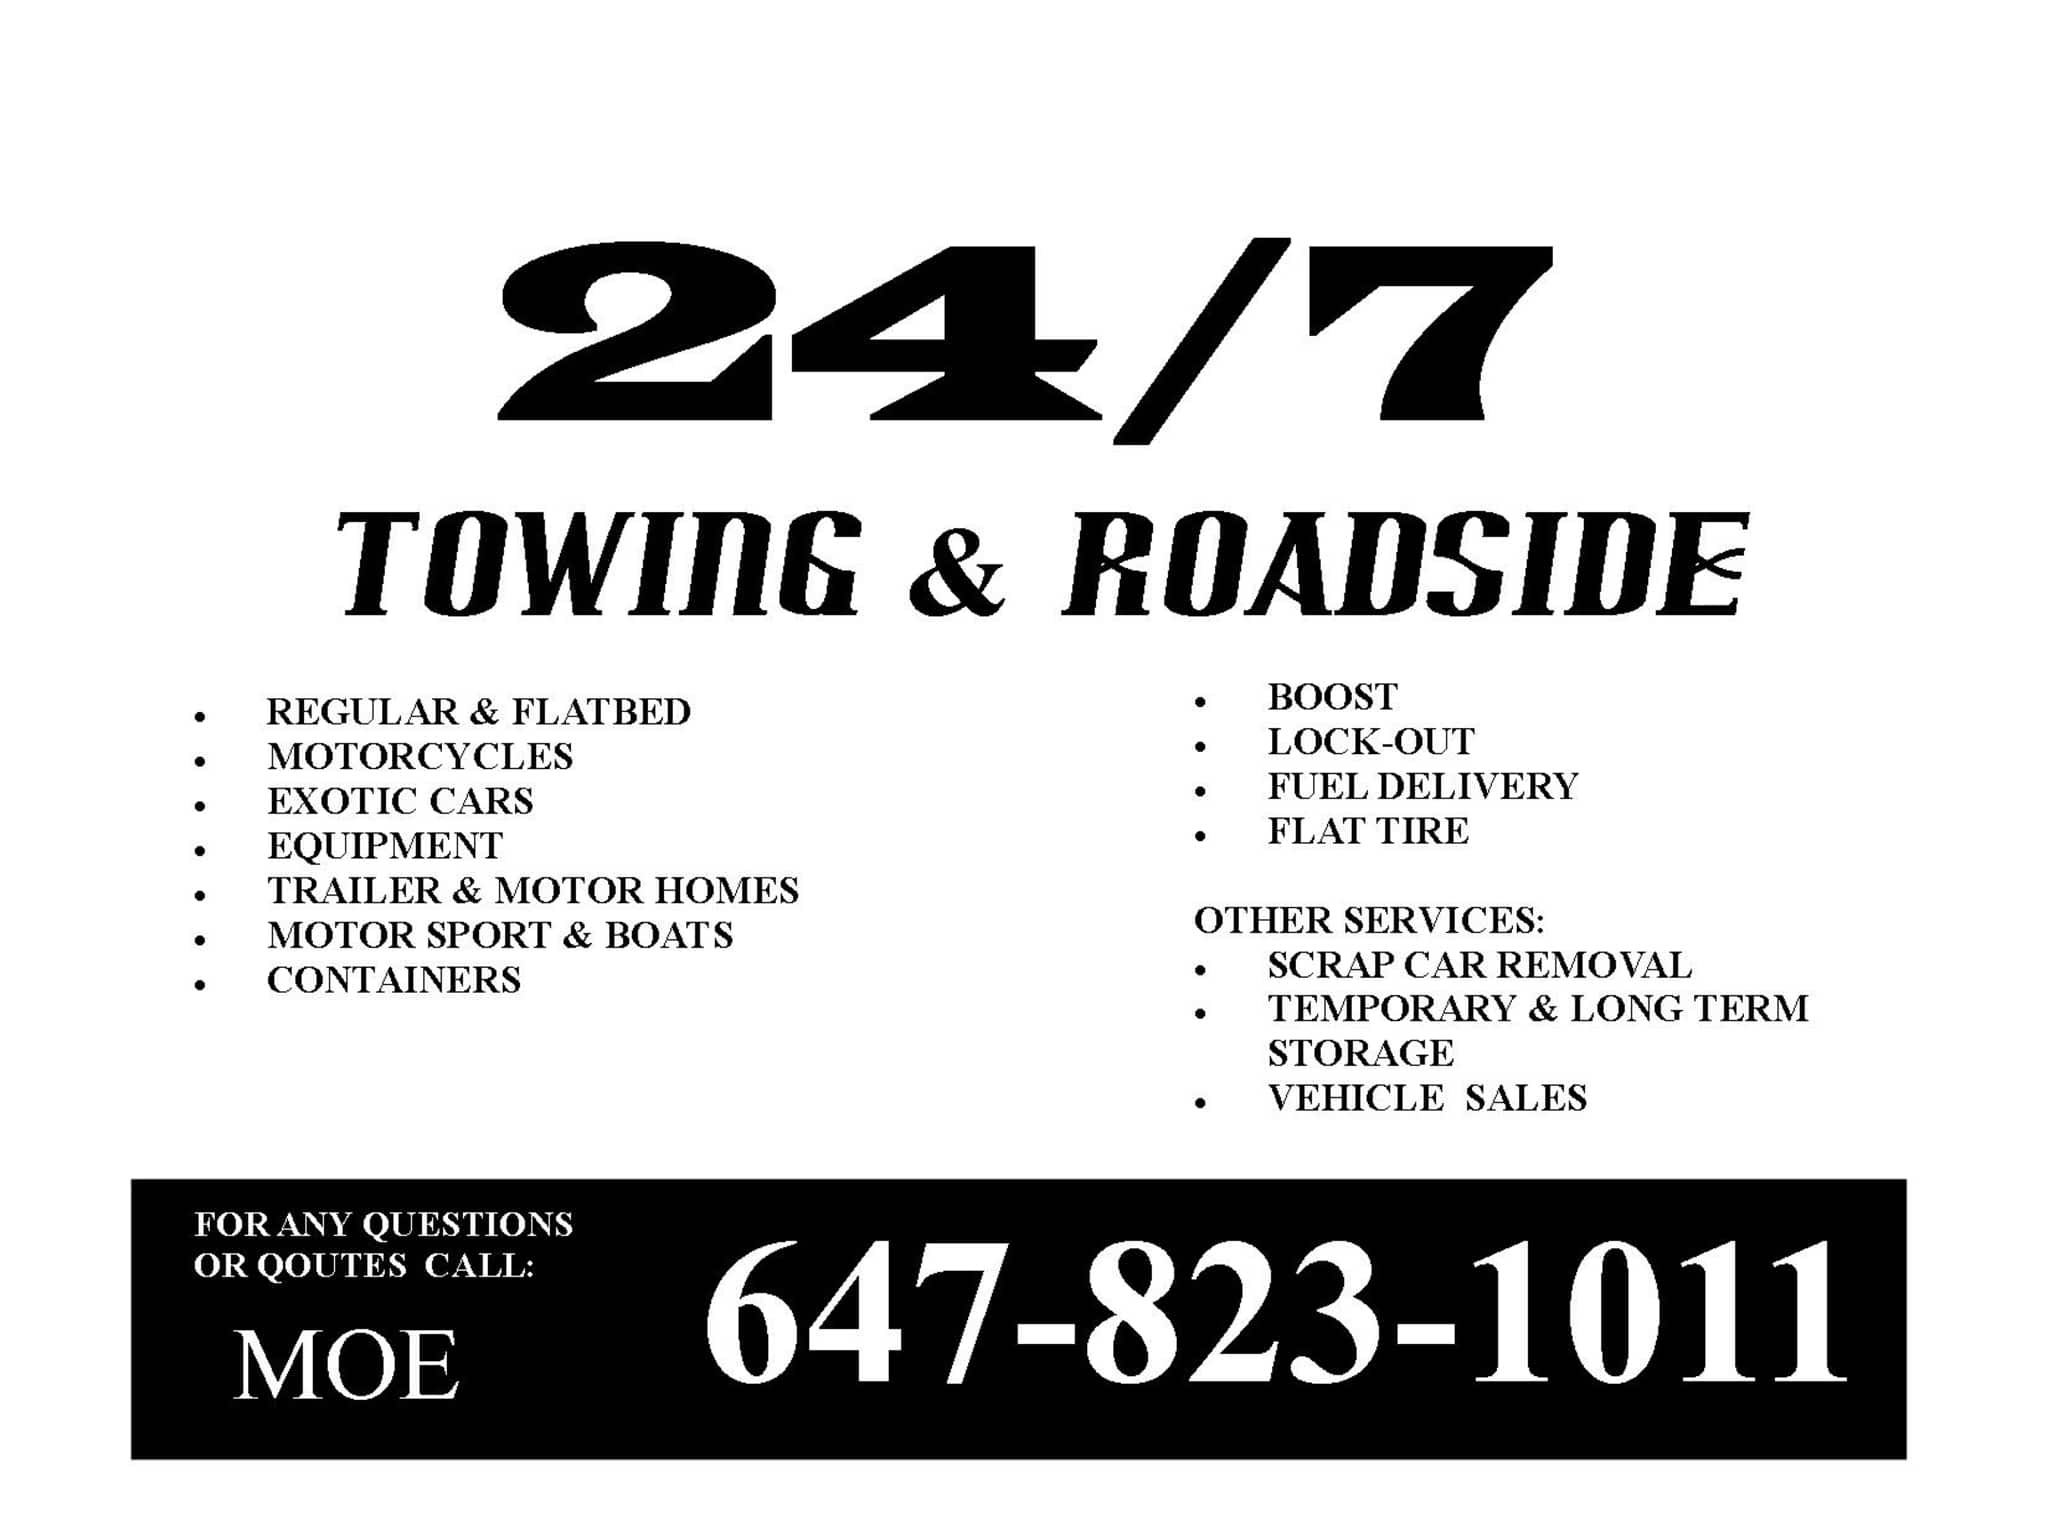 photo 24/7 Towing